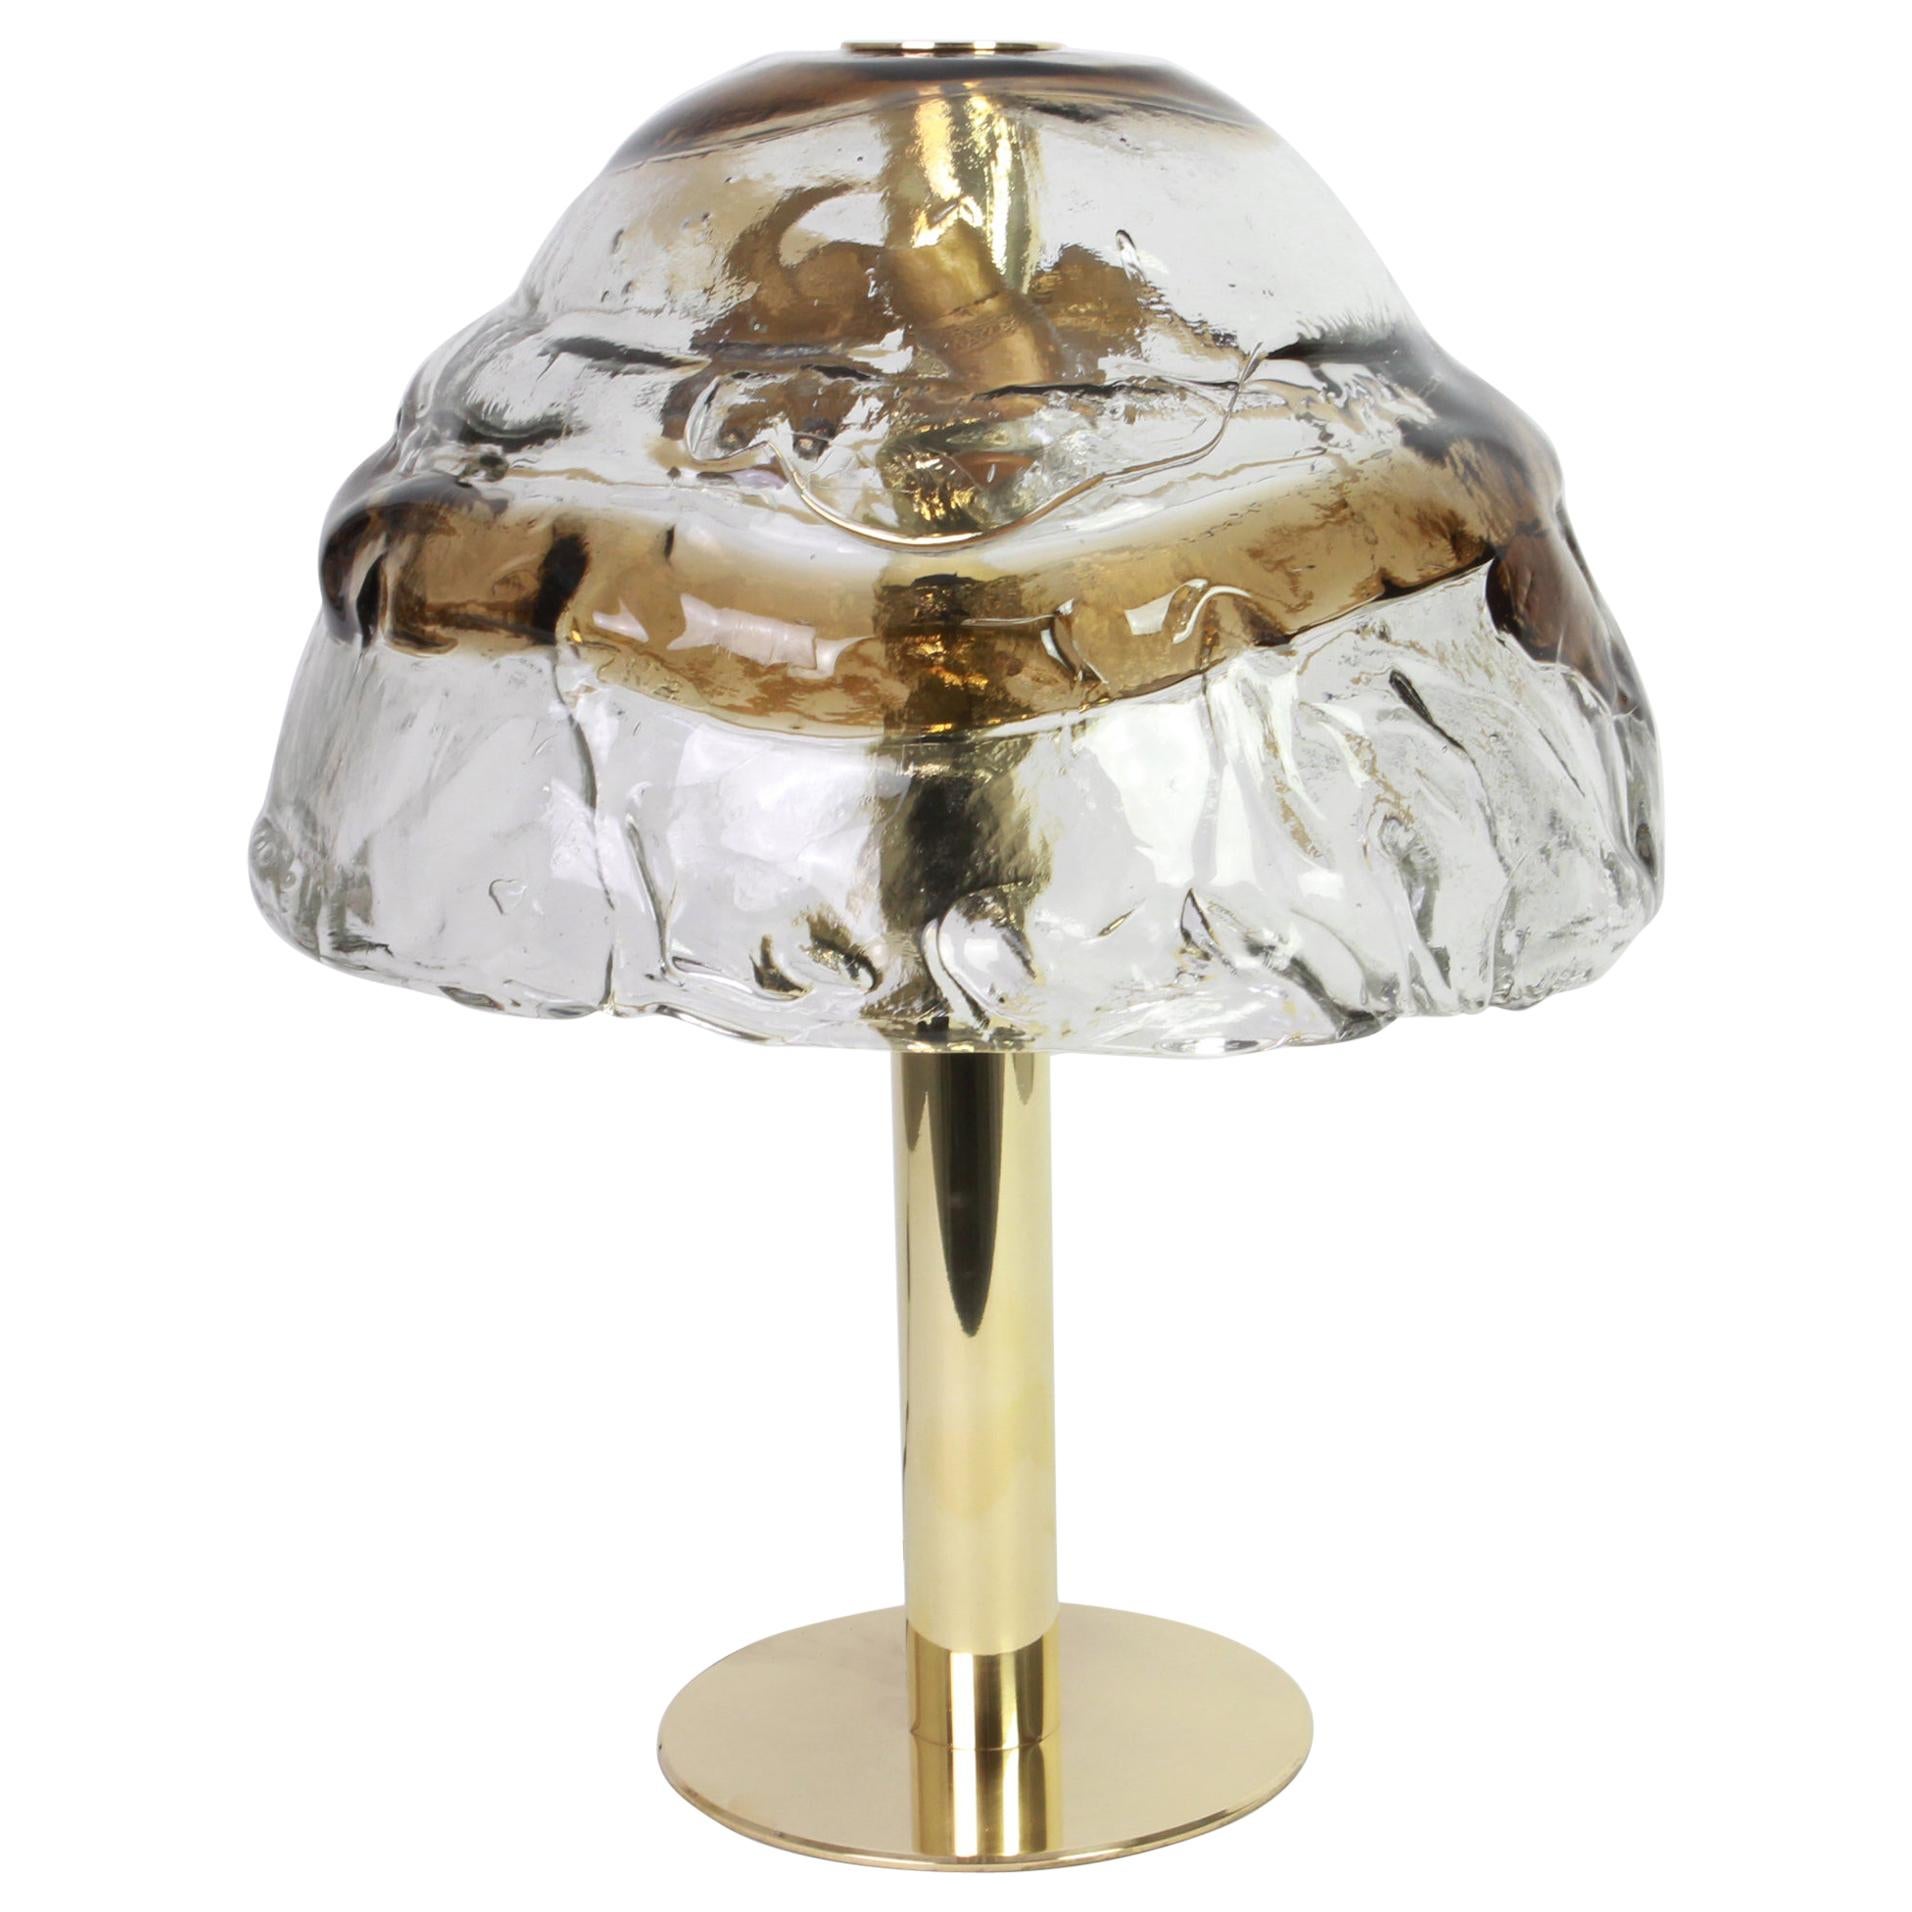 1 of 2 Large Murano Smoked Table lamp by Kalmar, Austria, For Sale at